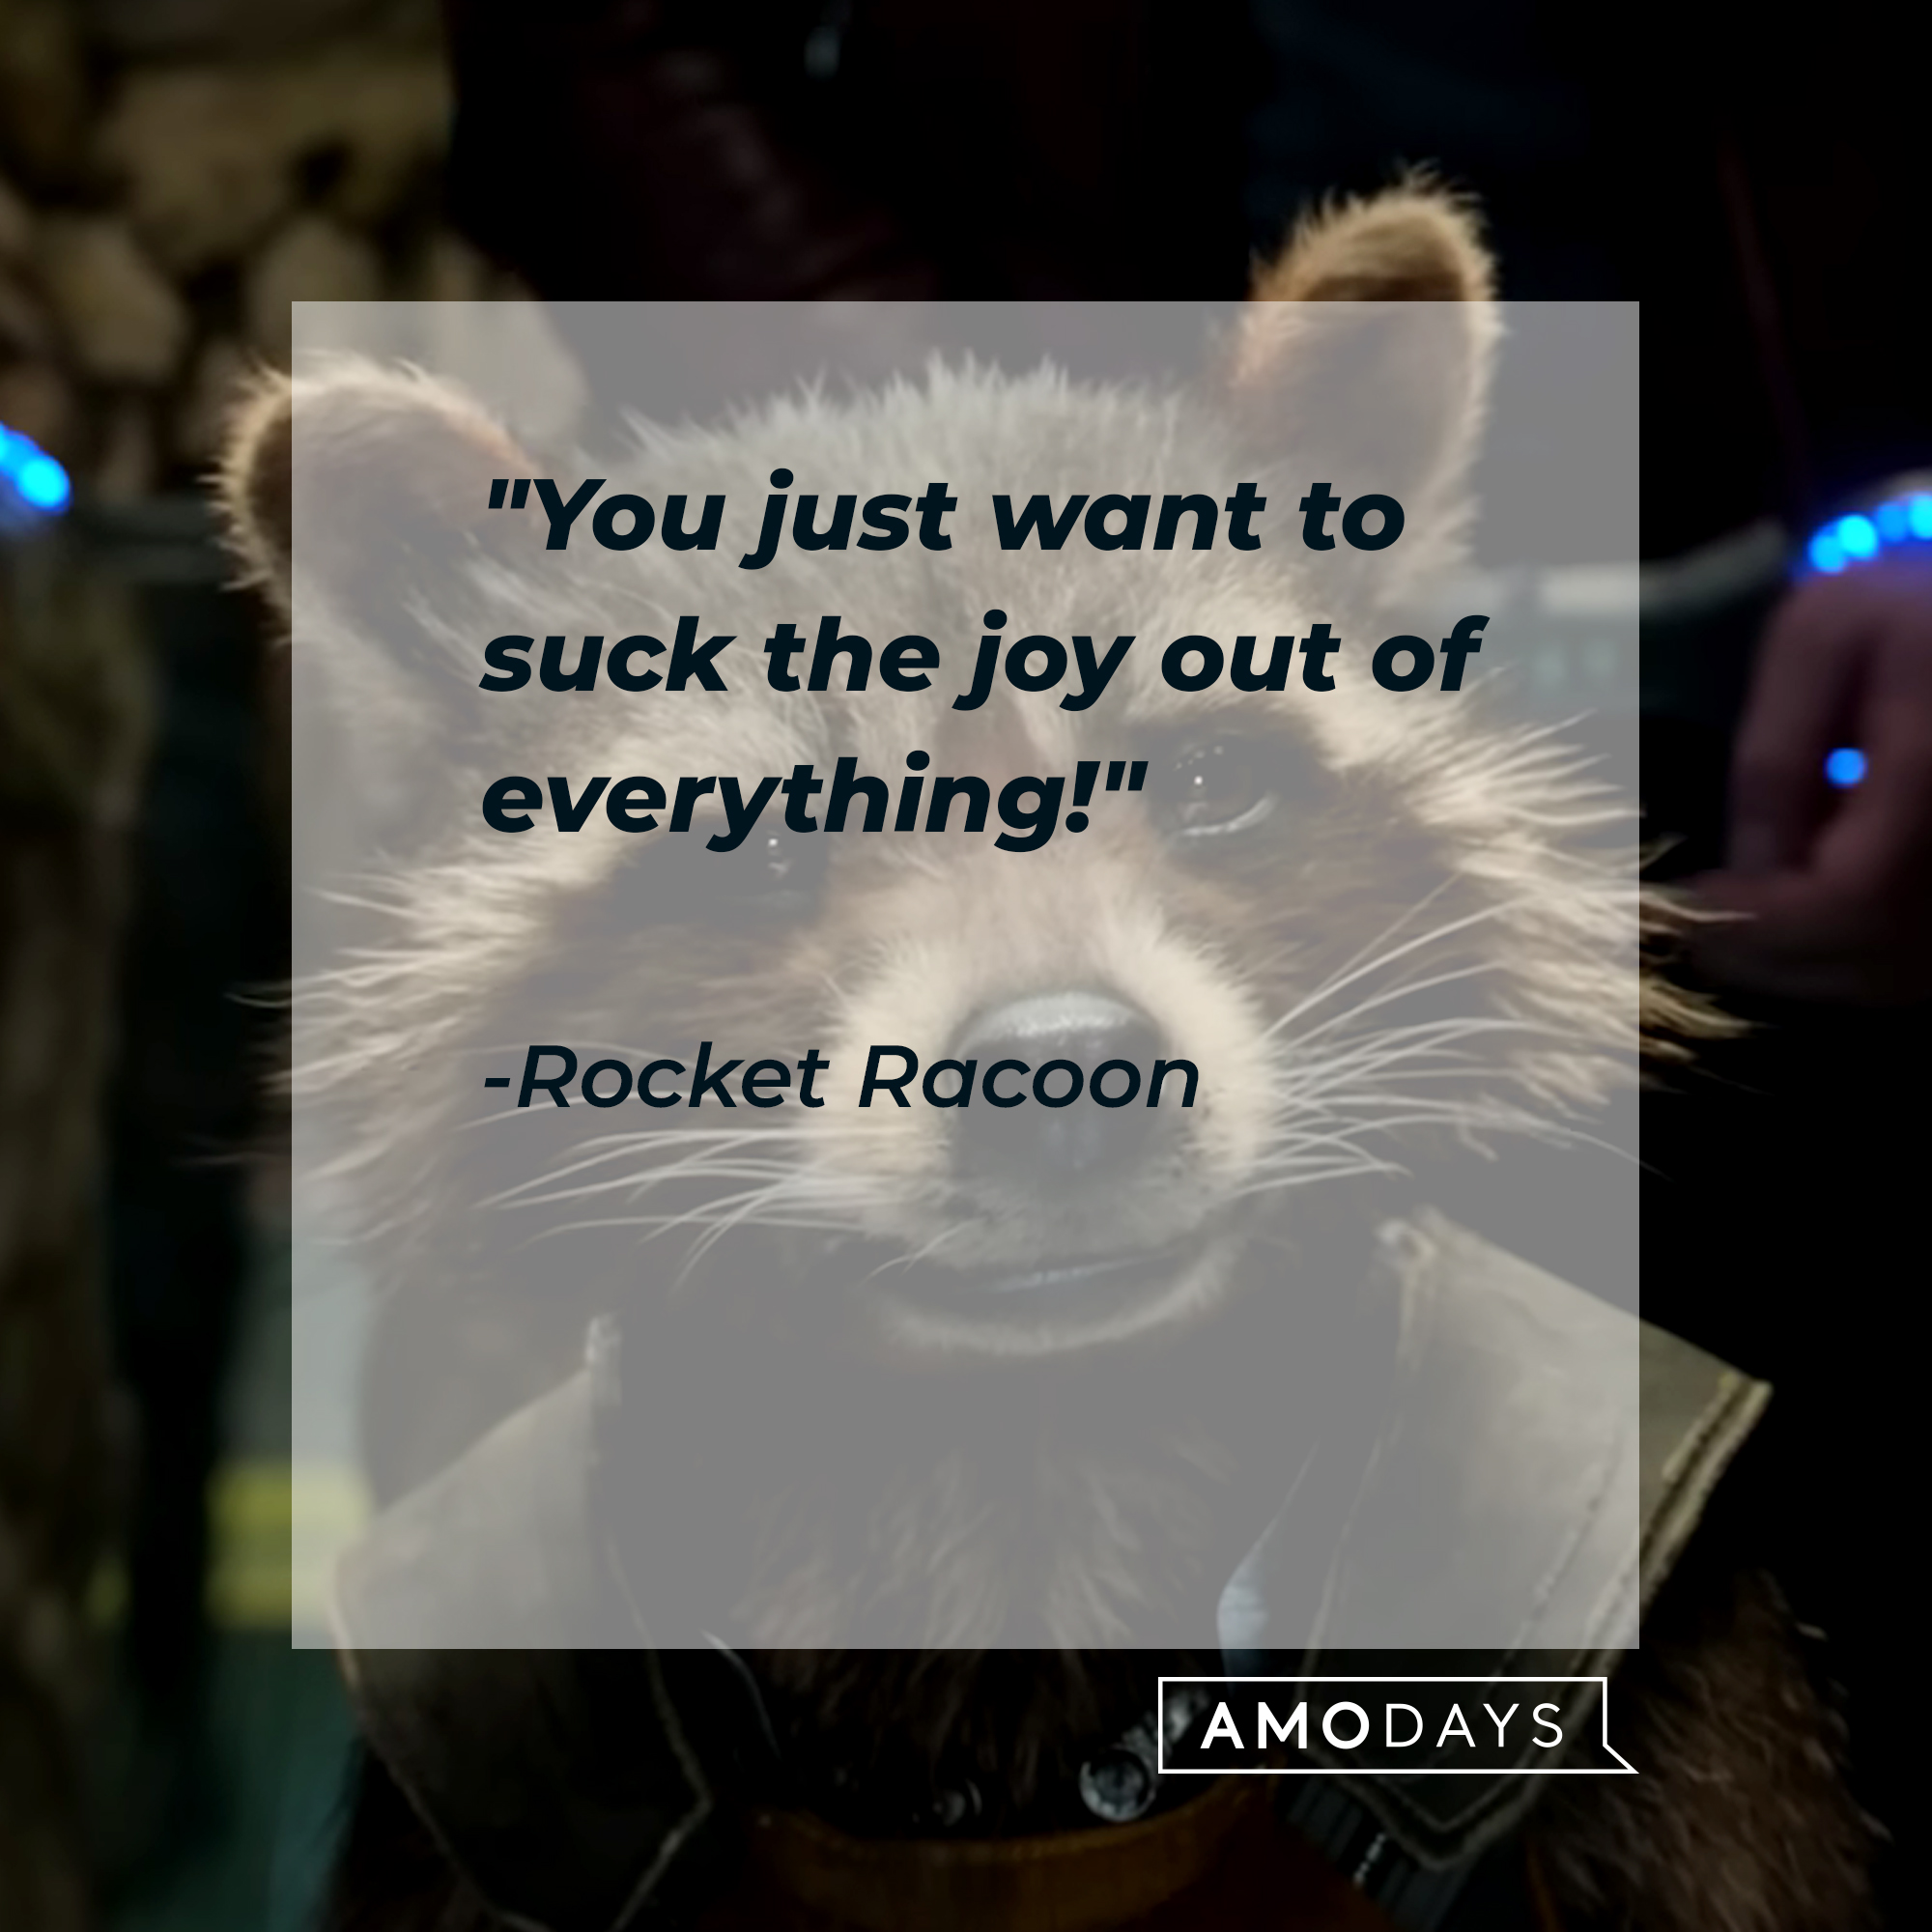 Rocket Raccoon's quote, "You just want to suck the joy out of everything!" | Image: youtube.com/marvel